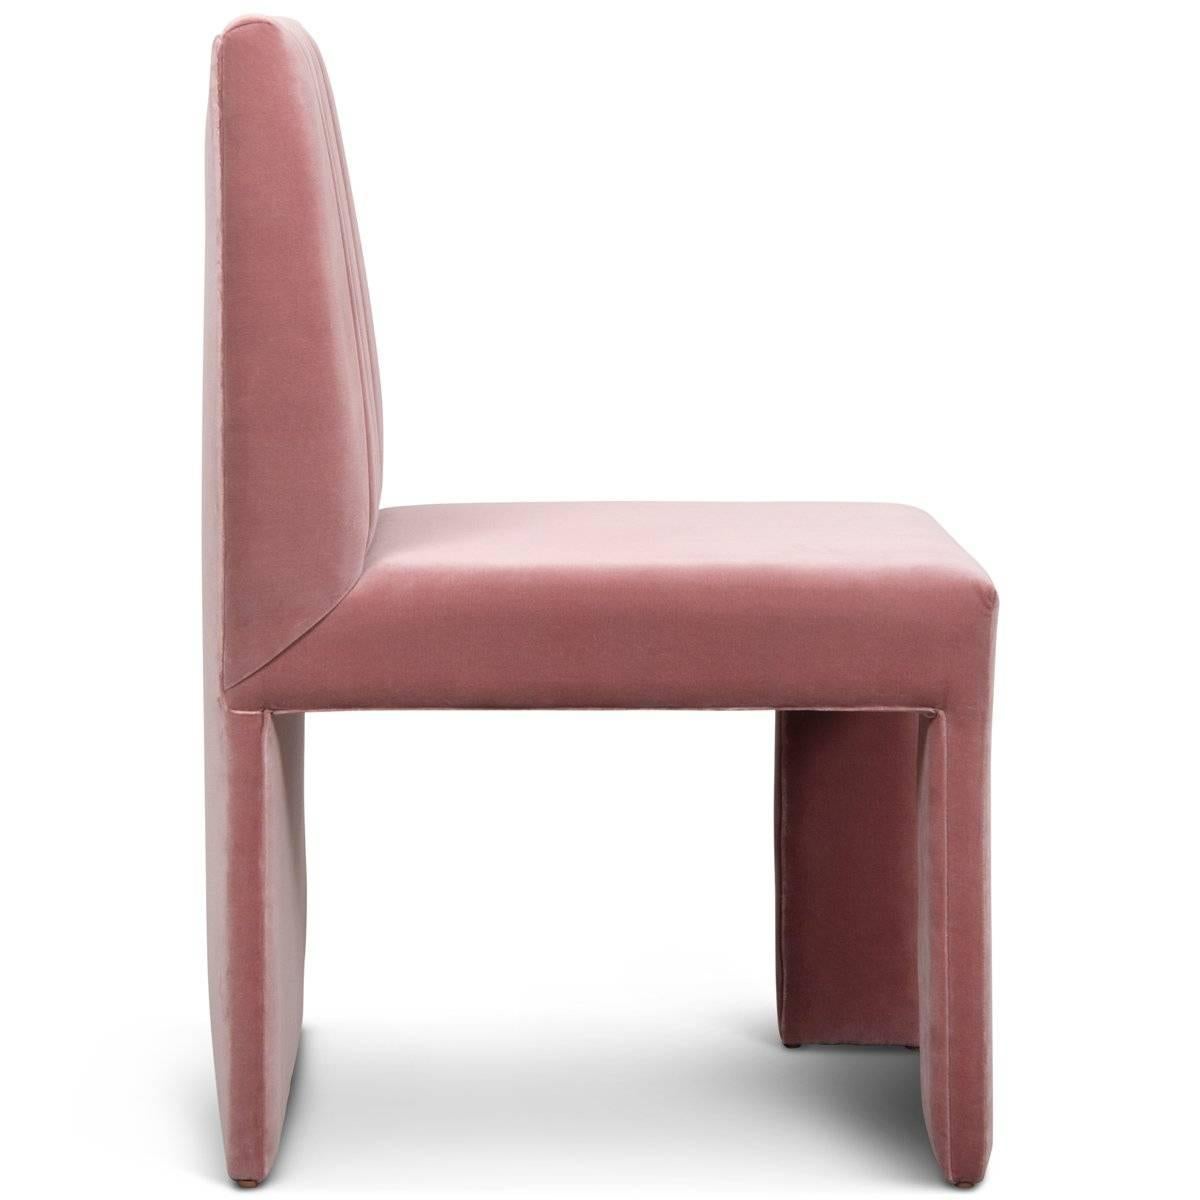 The St. Martin dining chair was designed as a perfect blend of form and function. Featuring a strikingly different profile from every angle, the St. Martin Dining Chair in mauve velvet has an appealing balance of negative and positive space. No